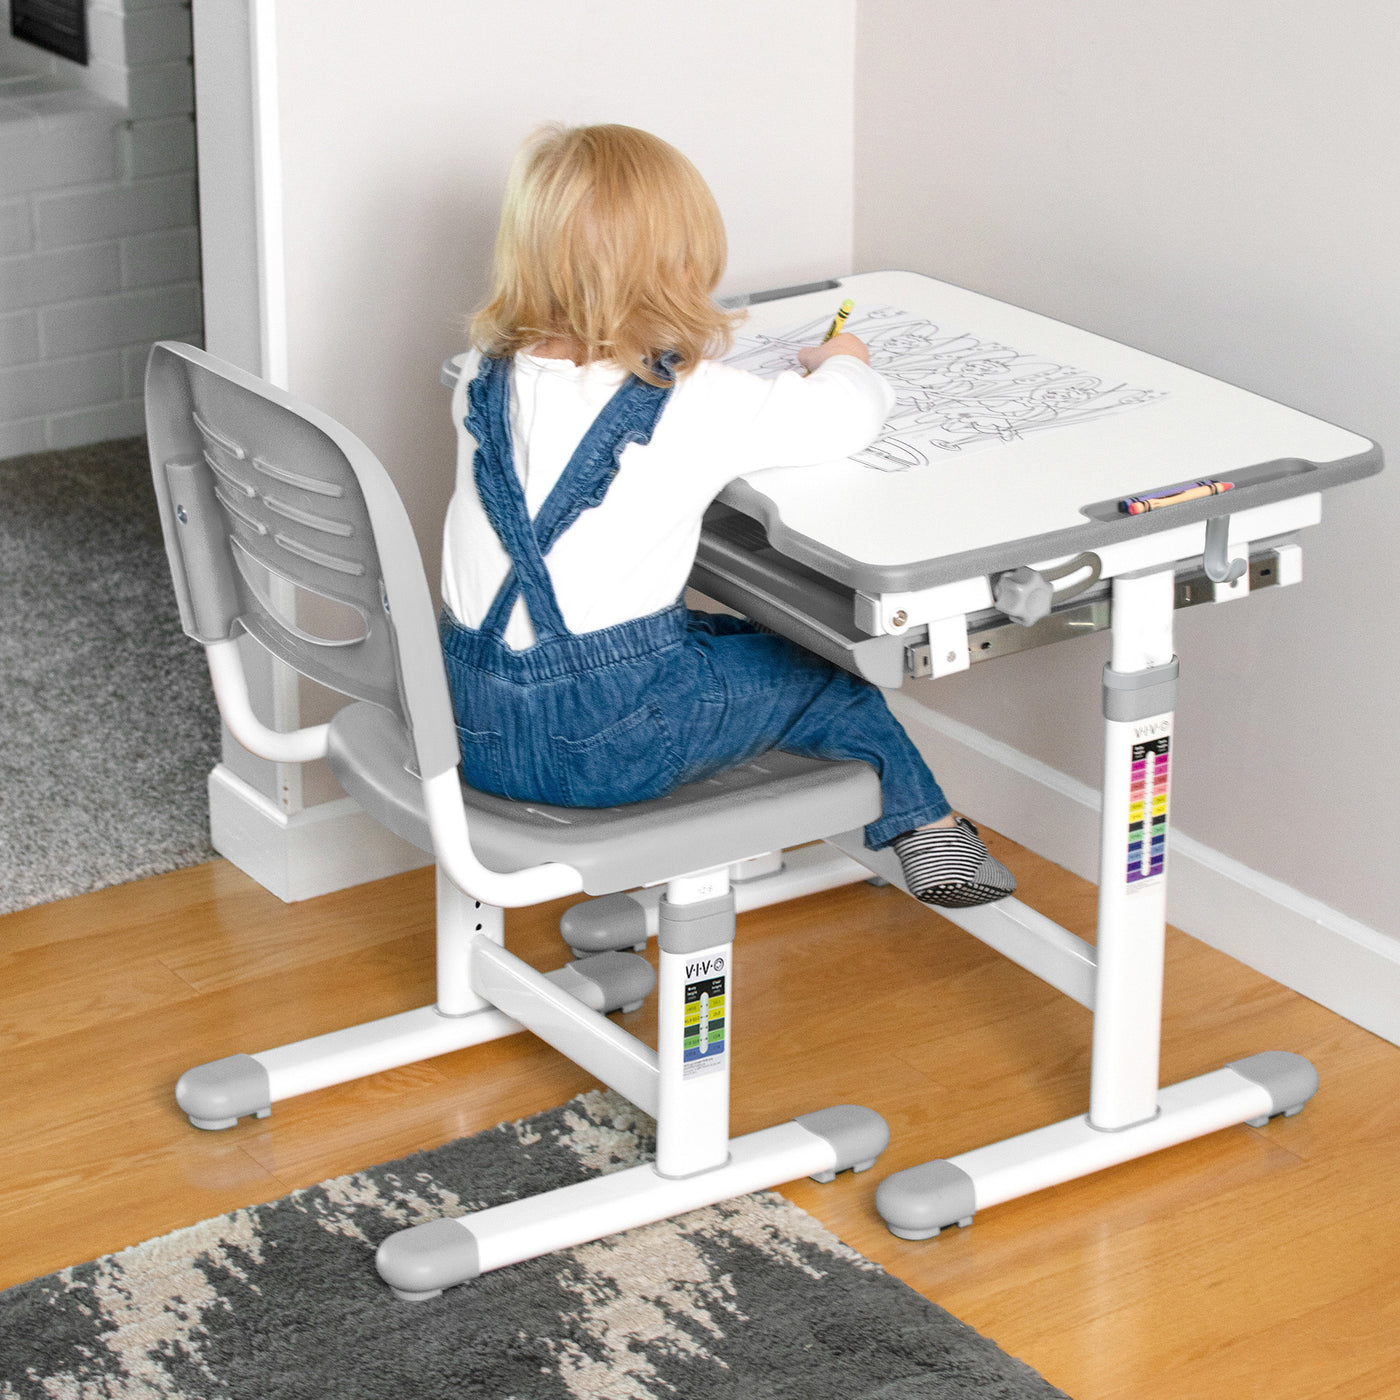 At home children's desk and chairs are being used as an art space for coloring.